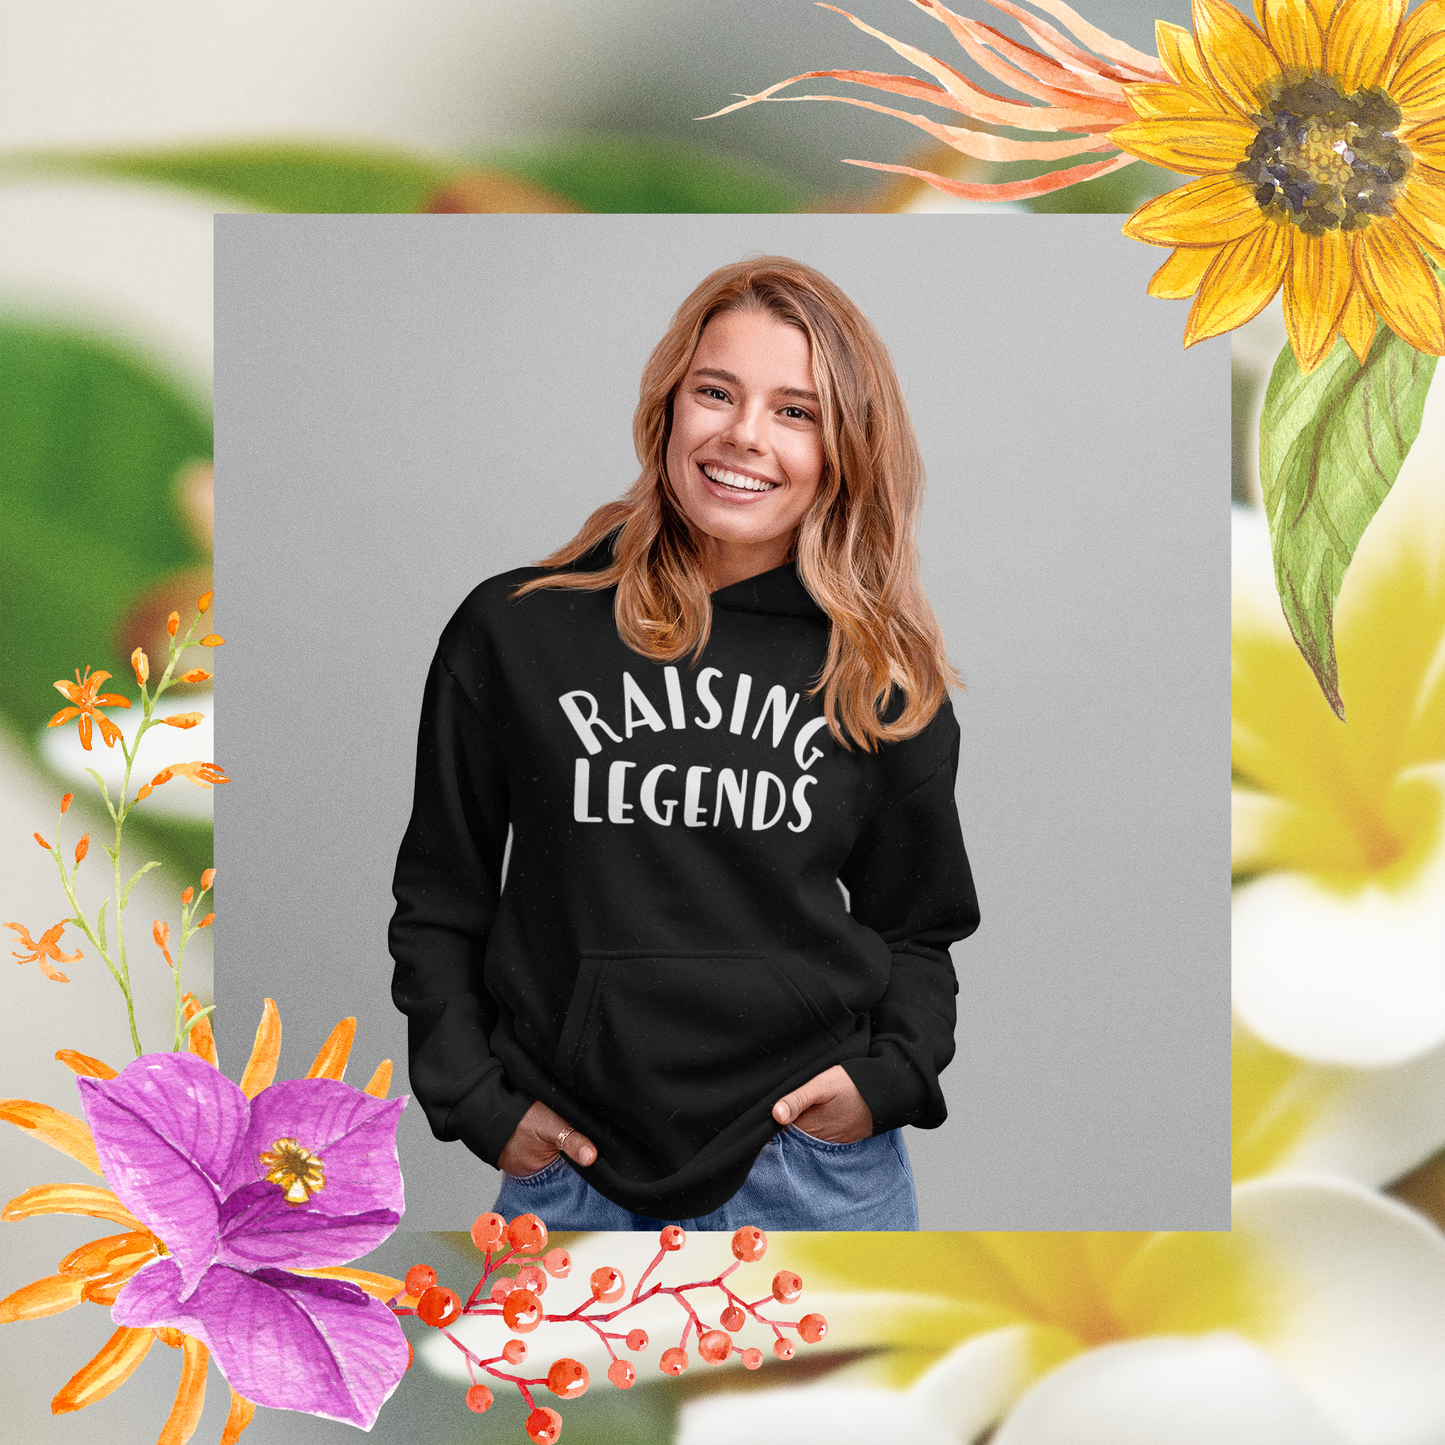 Raising Legends Black Sweatshirt Hoodie - Front ViewRaising Legends - Hooded Sweatshirt in black with white writing. Raising is curve at the top and legends is straight on the bottom. Features an innovative print process that raises the ink for a more defined design. This is the front view of the sweatshirt on a female model with a floral border.